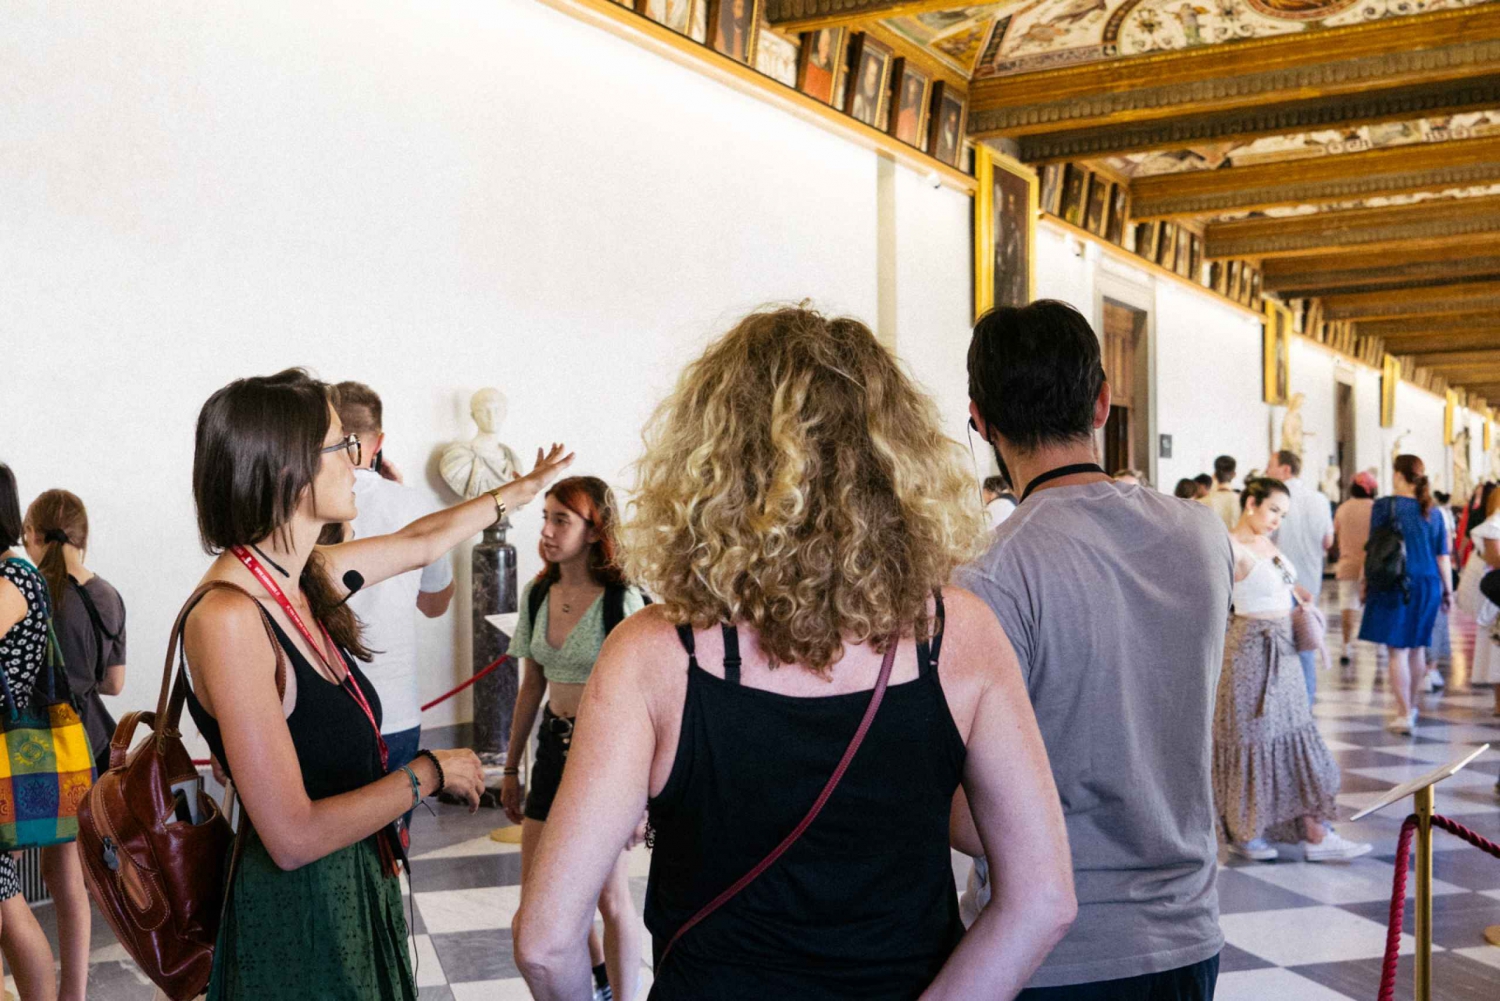 Skip-the-Line at Uffizi Gallery with a local guide